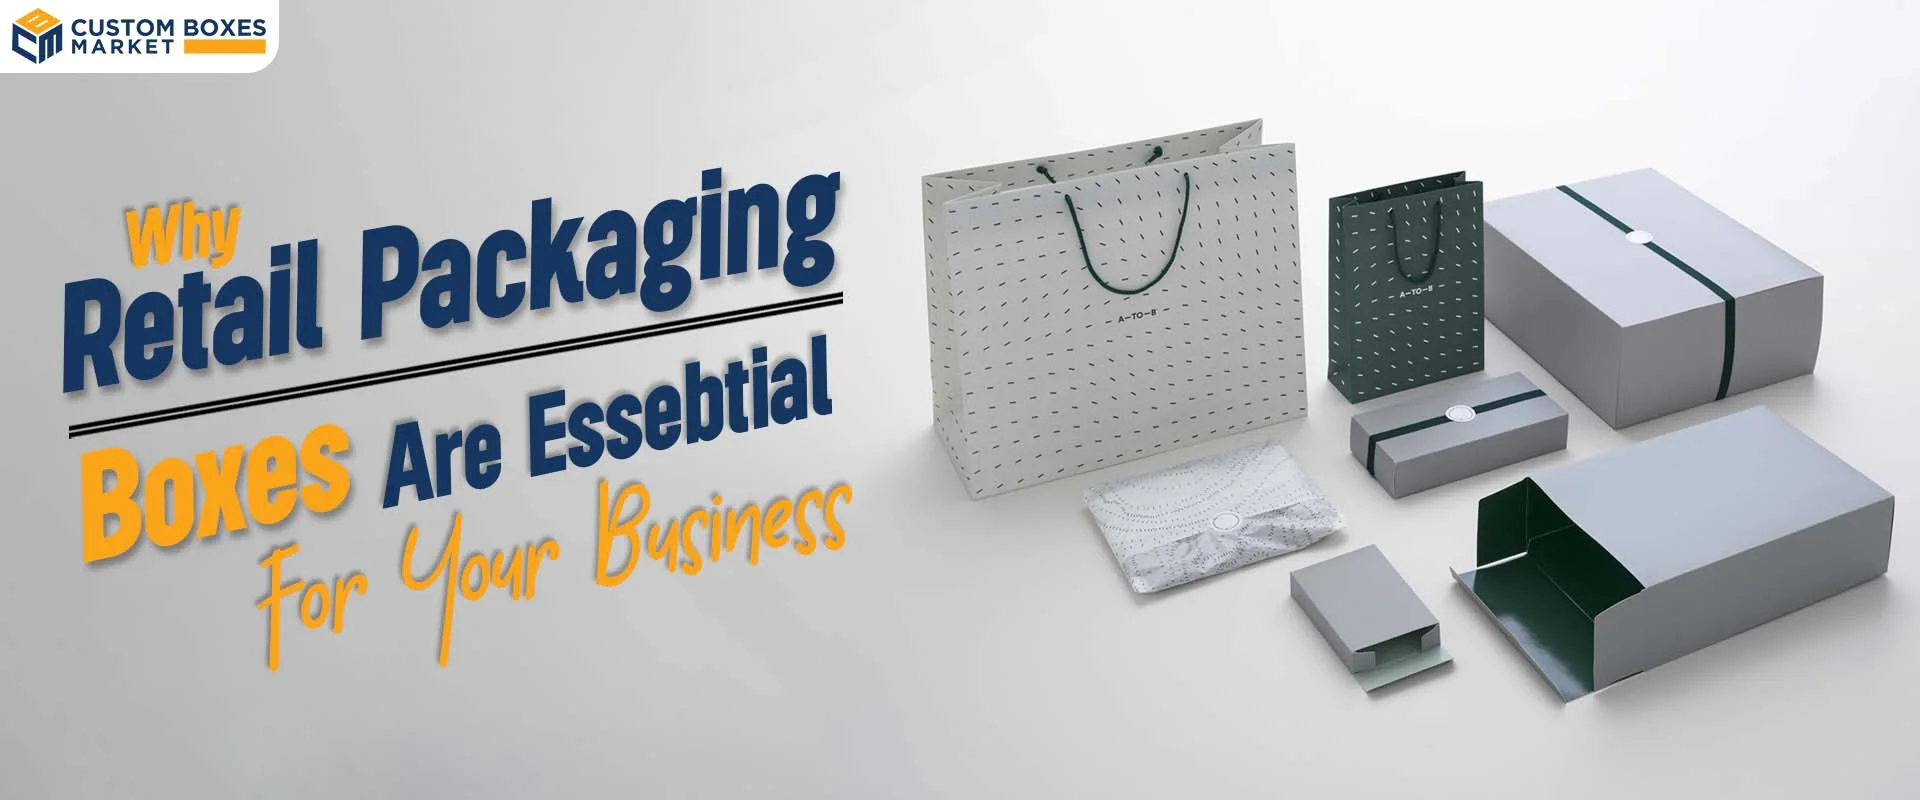 Why Retail Packaging Boxes Are Essential For Your Business